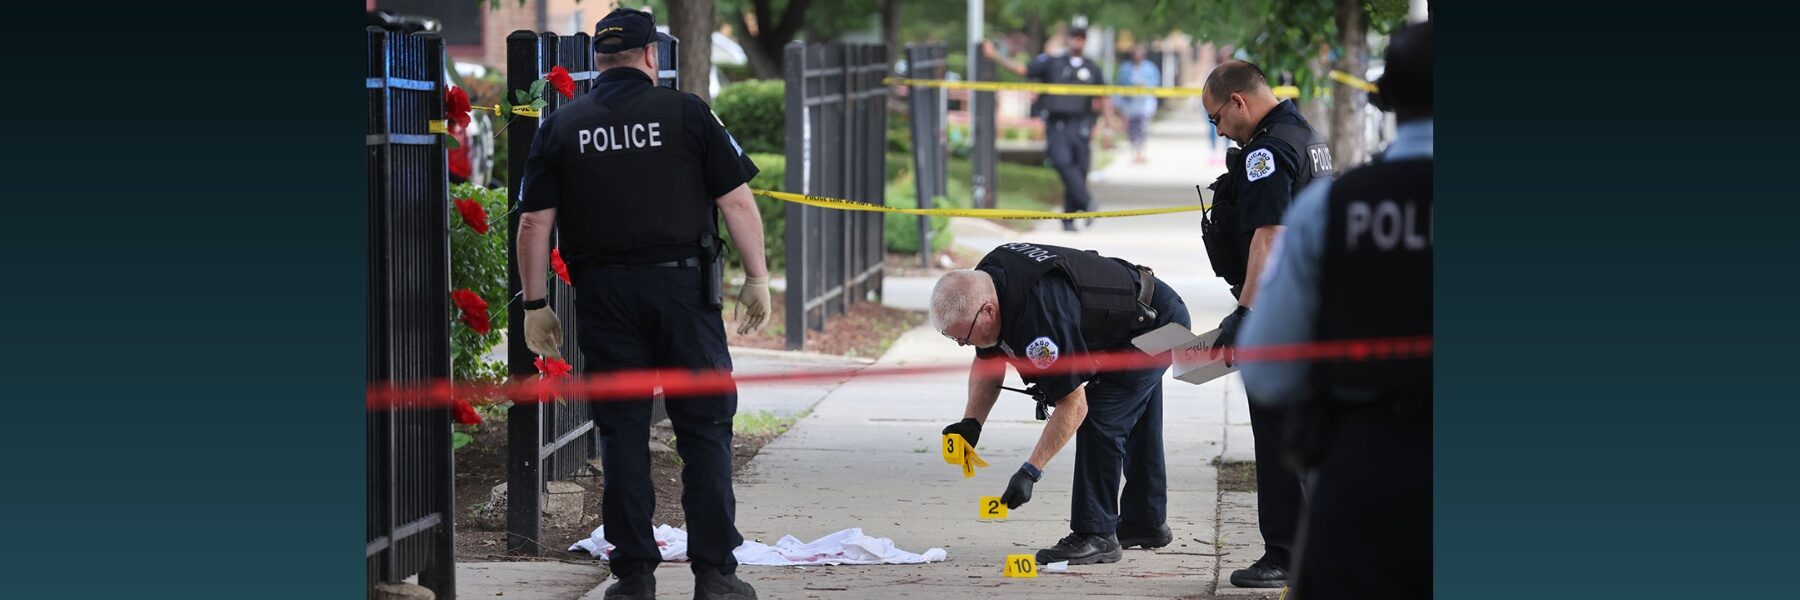 Illinois Police say 6 killed in shooting at Fourth of July parade.